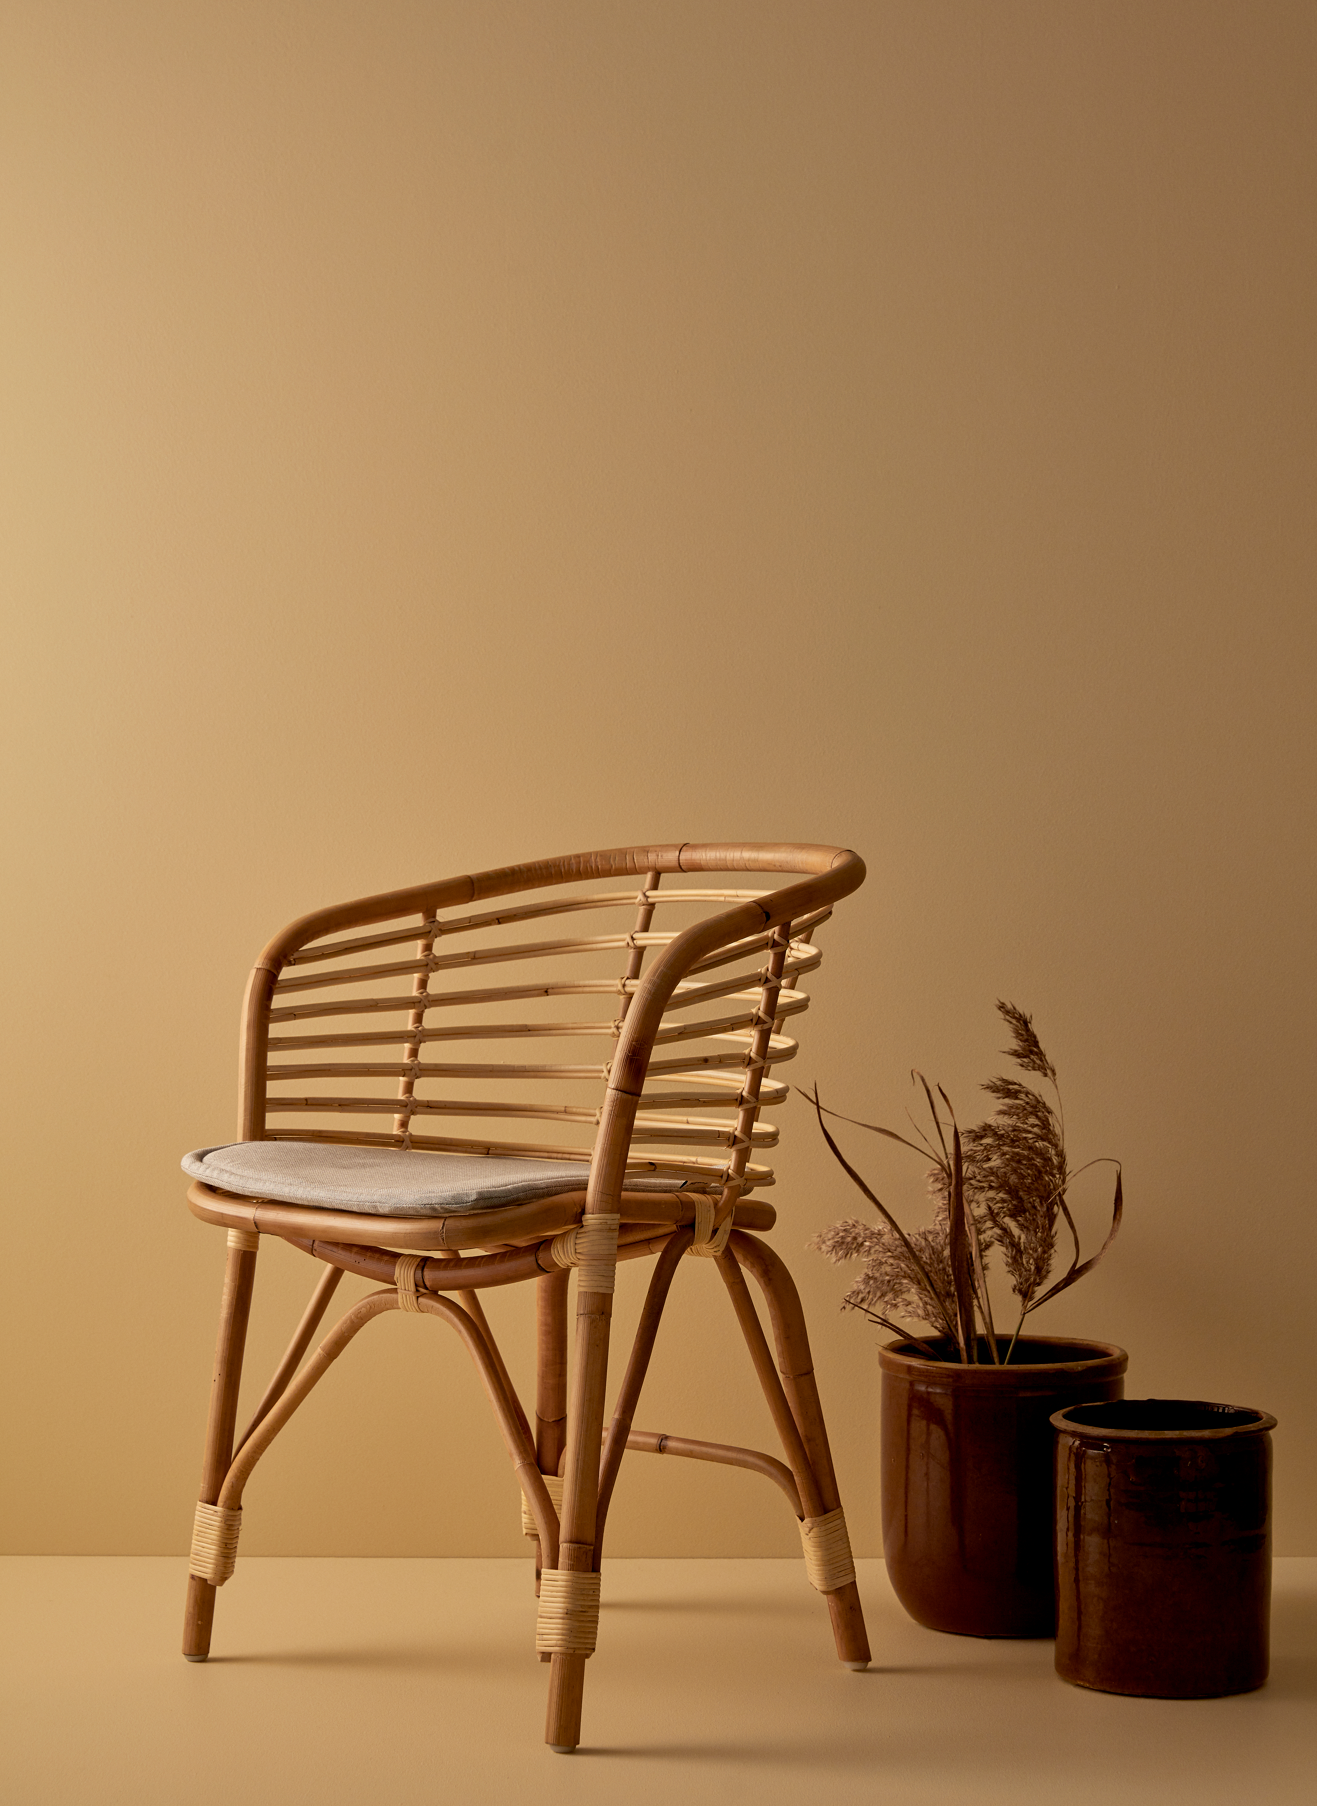 Rattan chair with cushion, potted grasses, against beige background.